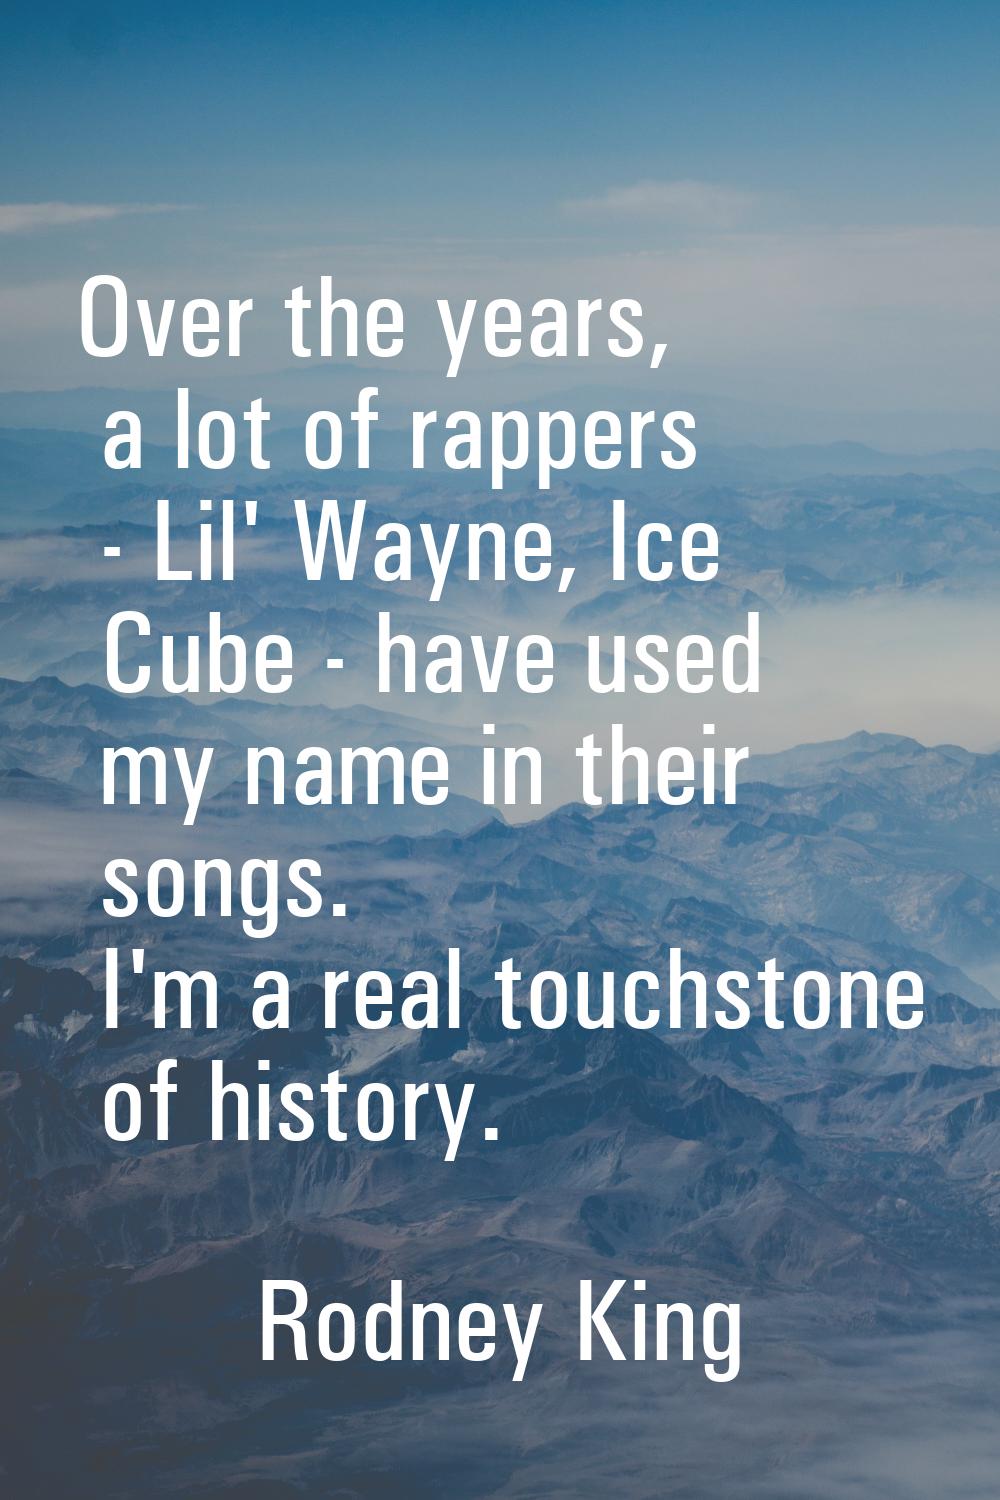 Over the years, a lot of rappers - Lil' Wayne, Ice Cube - have used my name in their songs. I'm a r